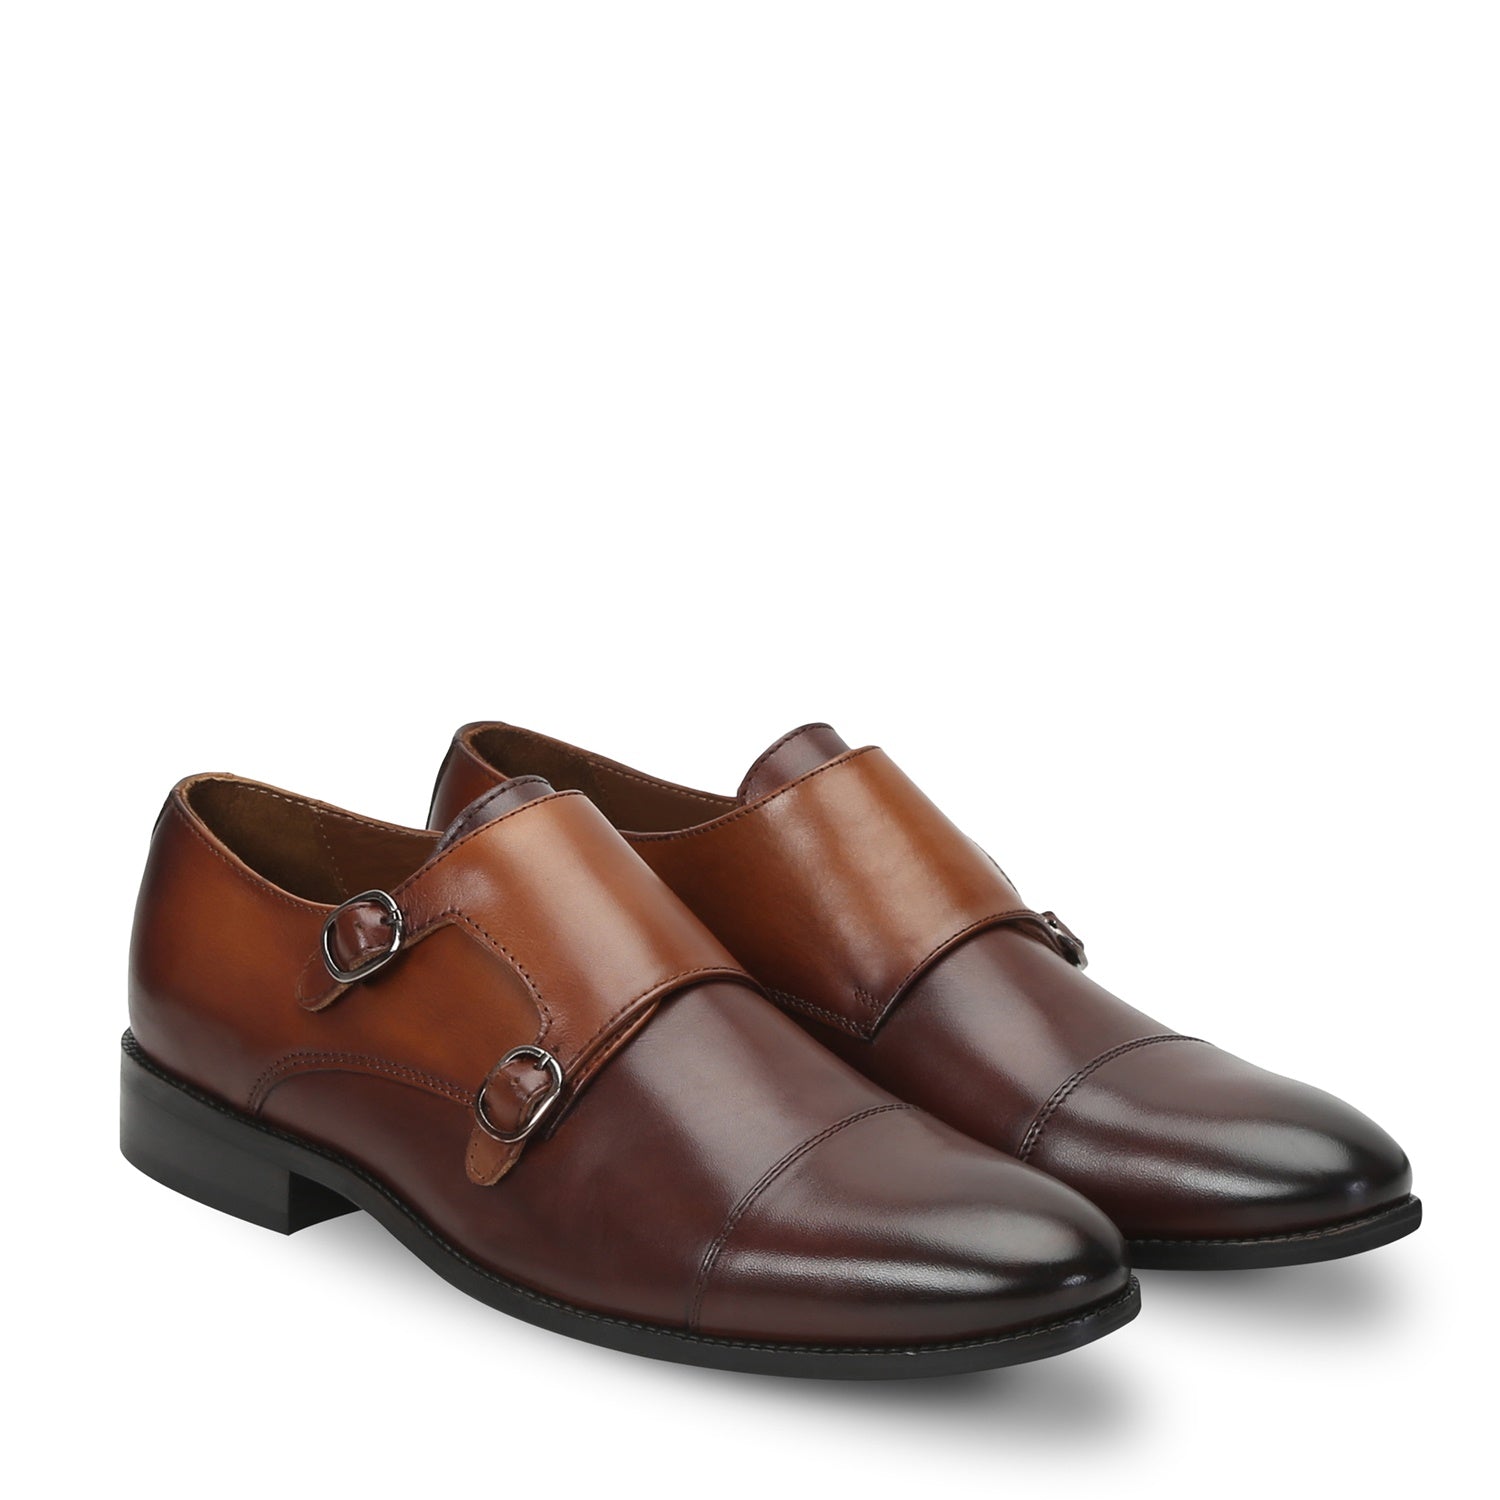 Brown Genuine Leather Monk Shoes By Brune & Bareskin